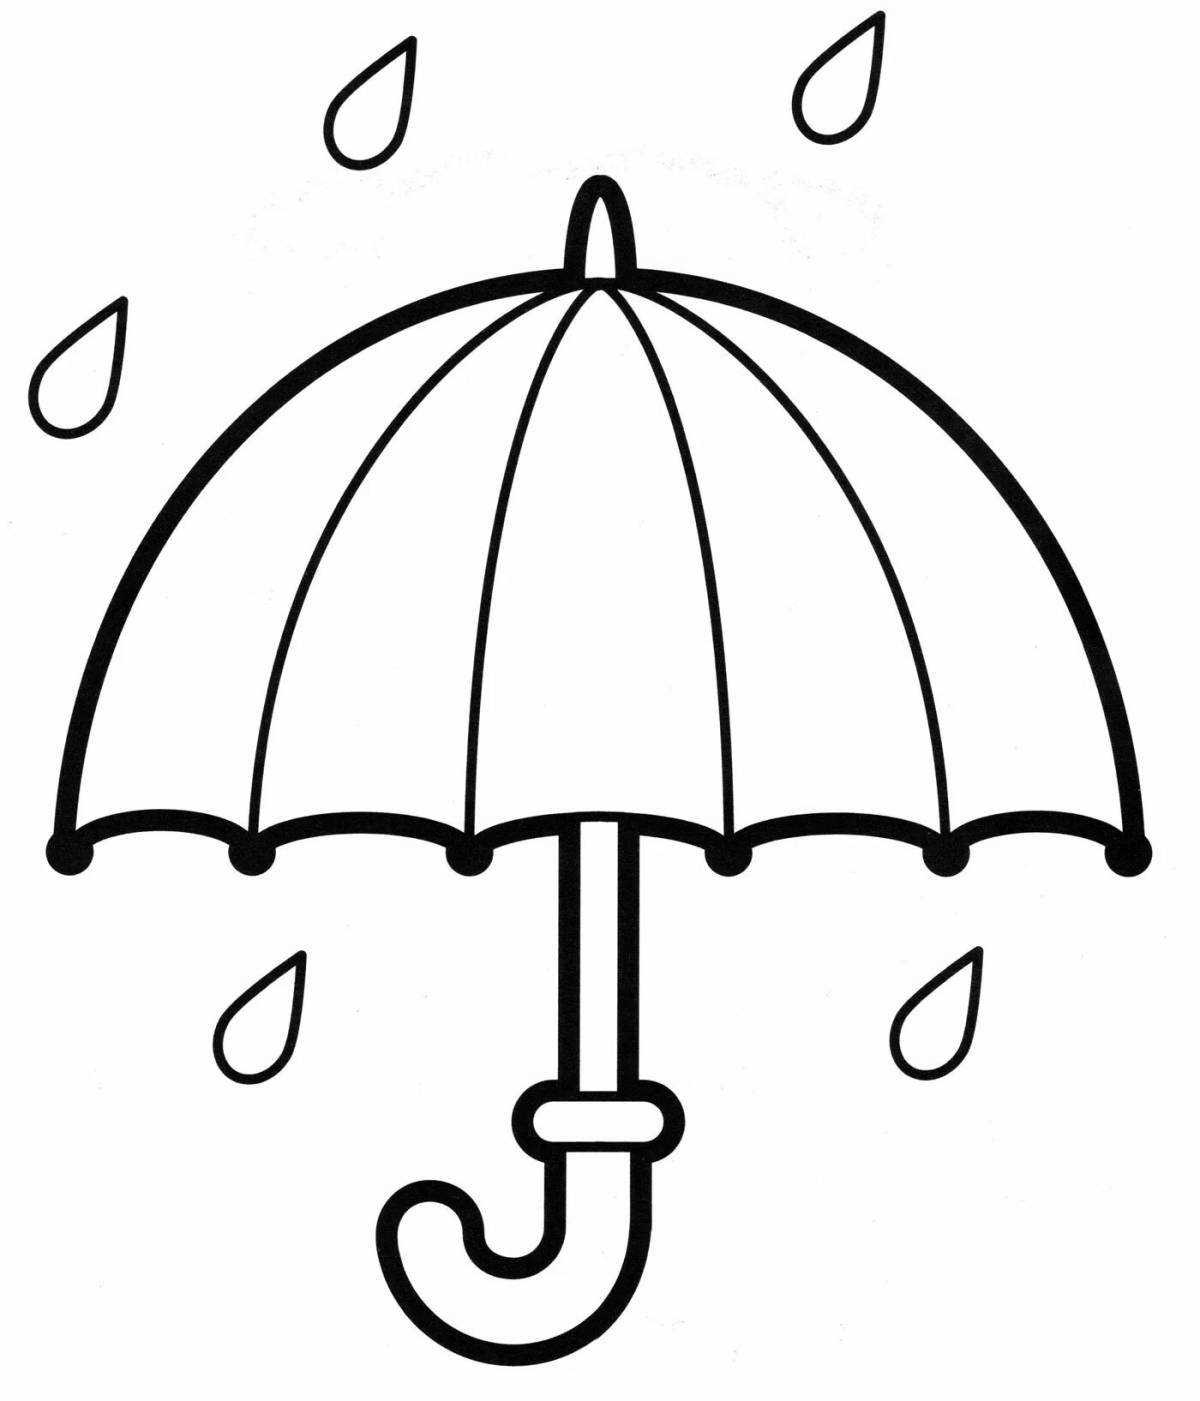 Colorful and colorful and playful umbrella coloring page for kids